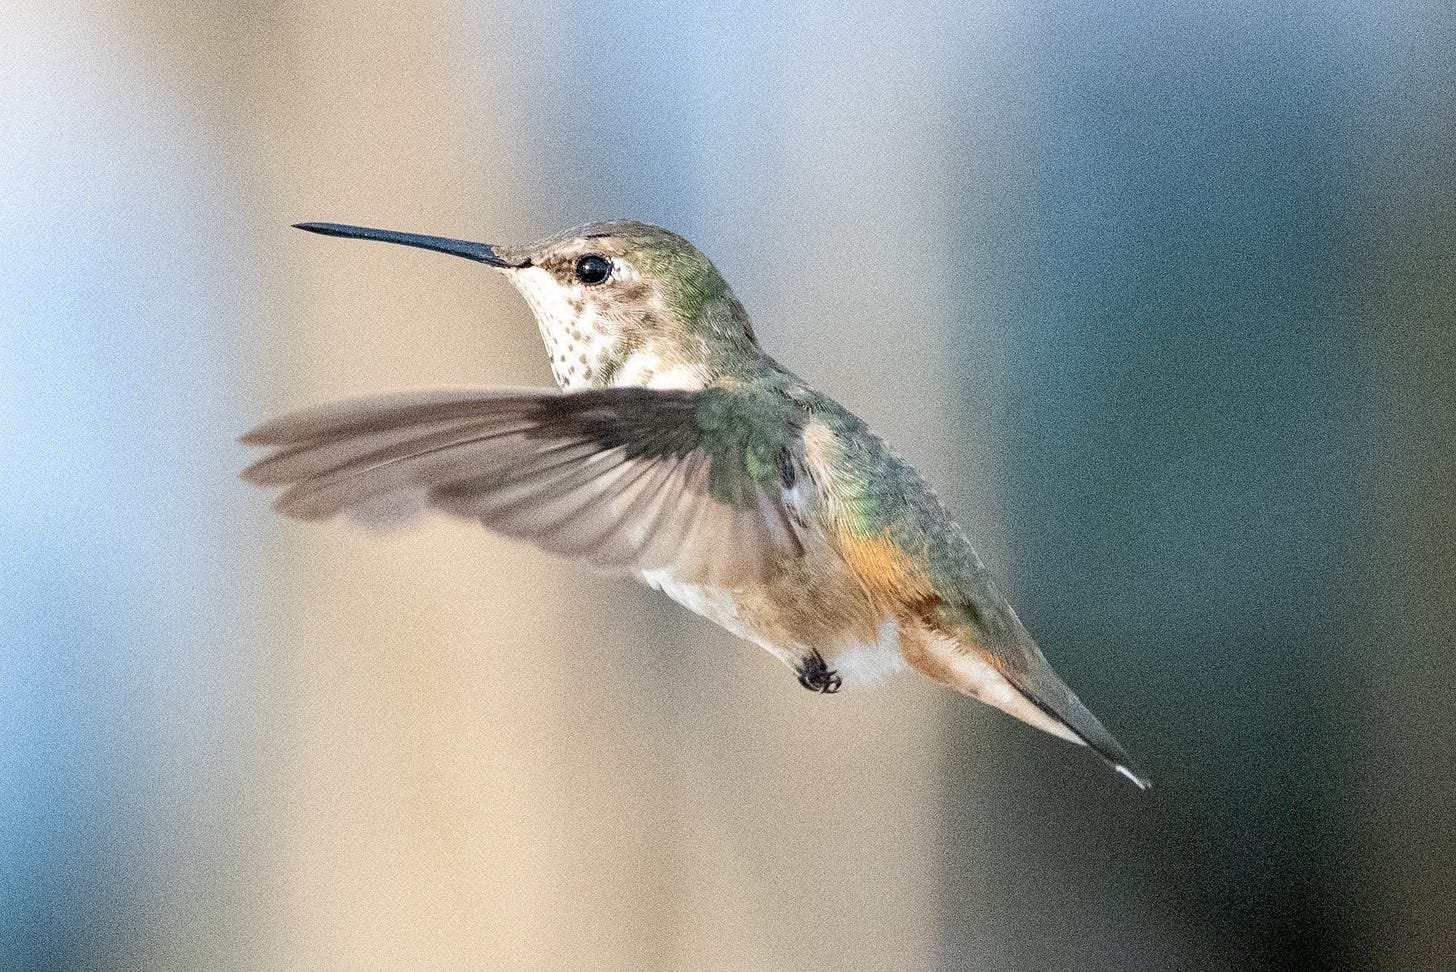 A flying hummingbird in profile, its back green, its wings extended forward, with a sandy orange coloration on its flanks